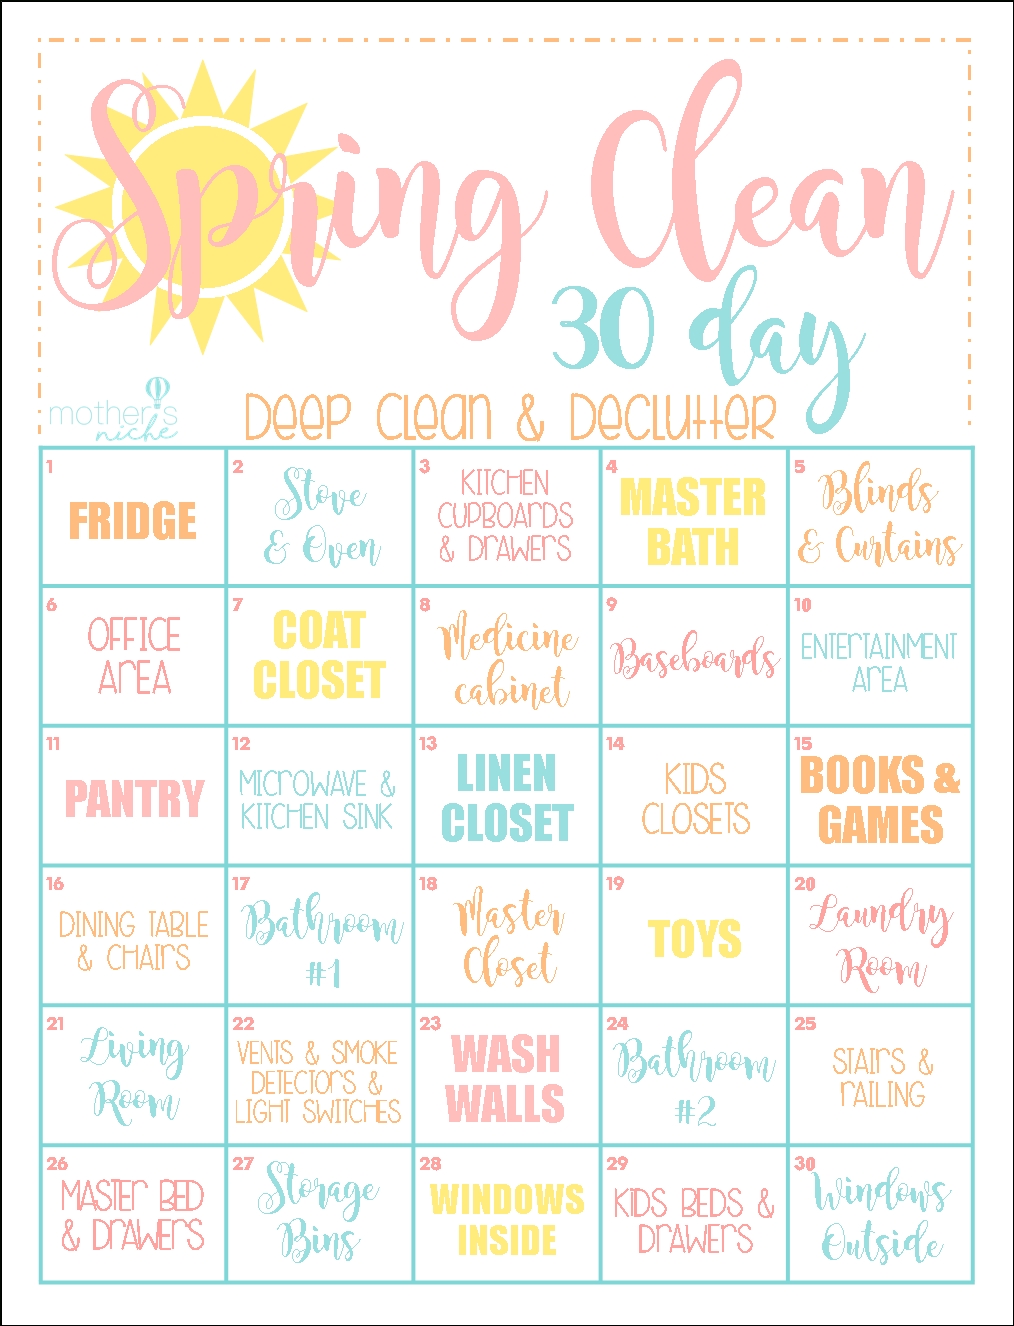 The 30 Day Clean Home Challenge: Spring Clean Up Printable